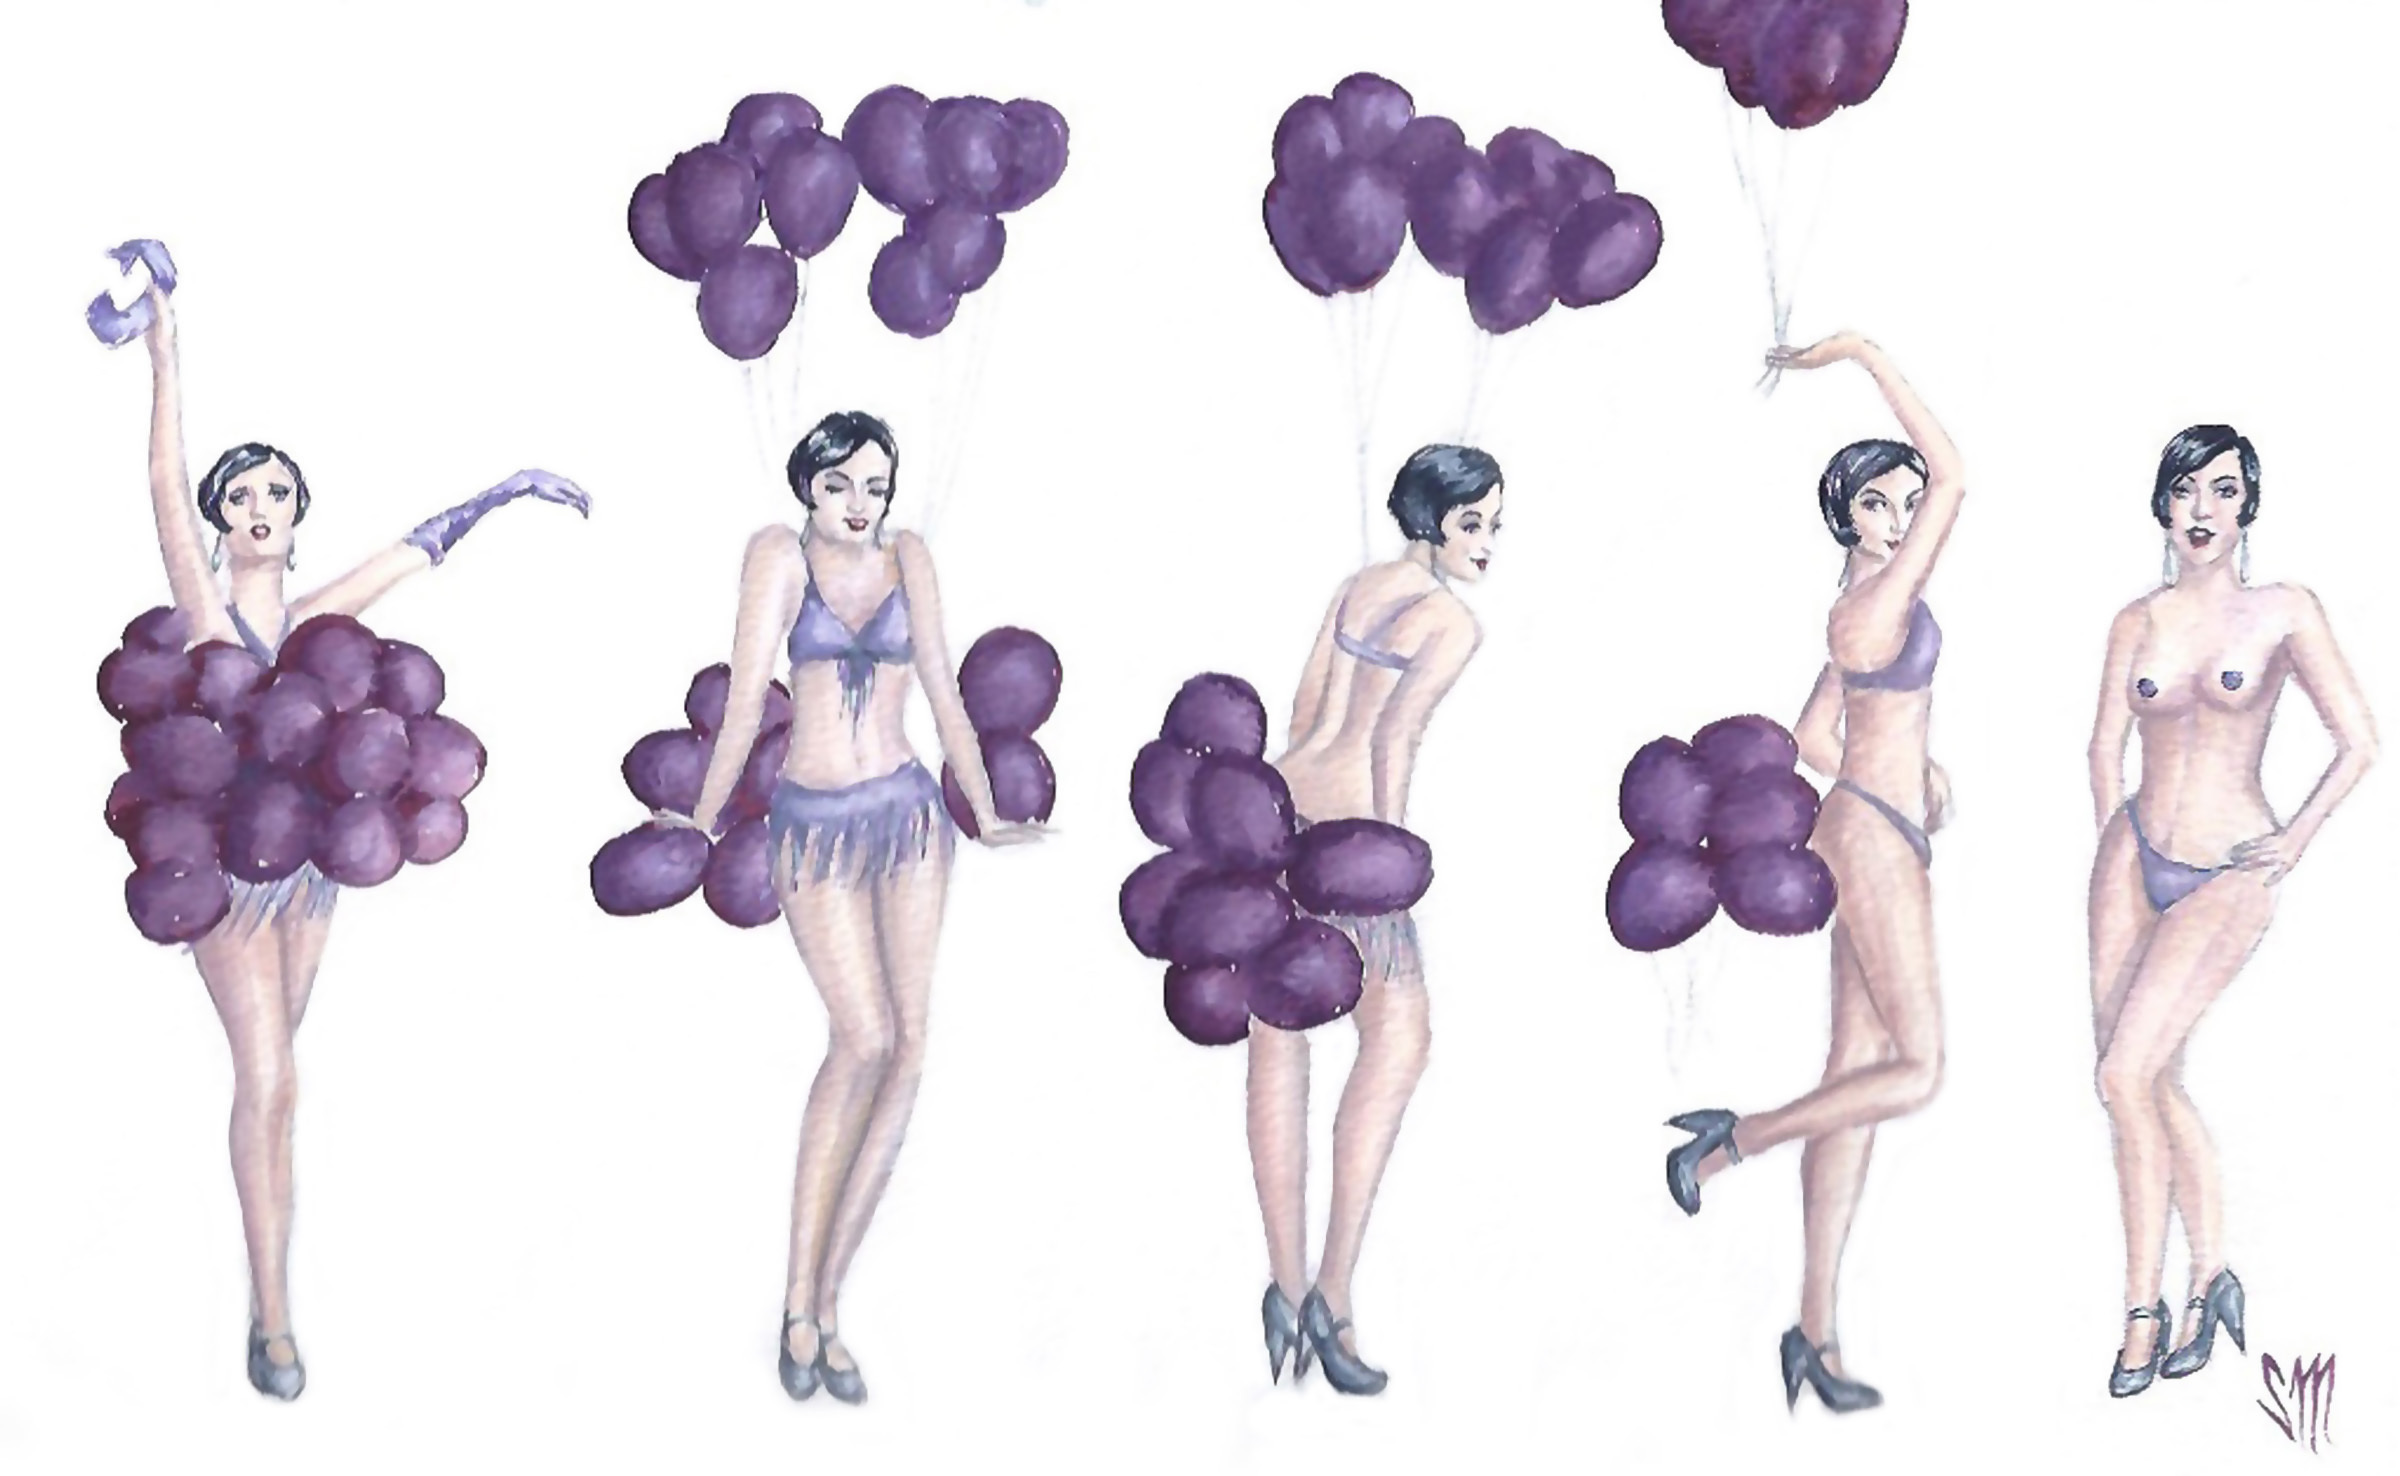 Balloon Burlesque (Inspired by Michelle L’Amour)